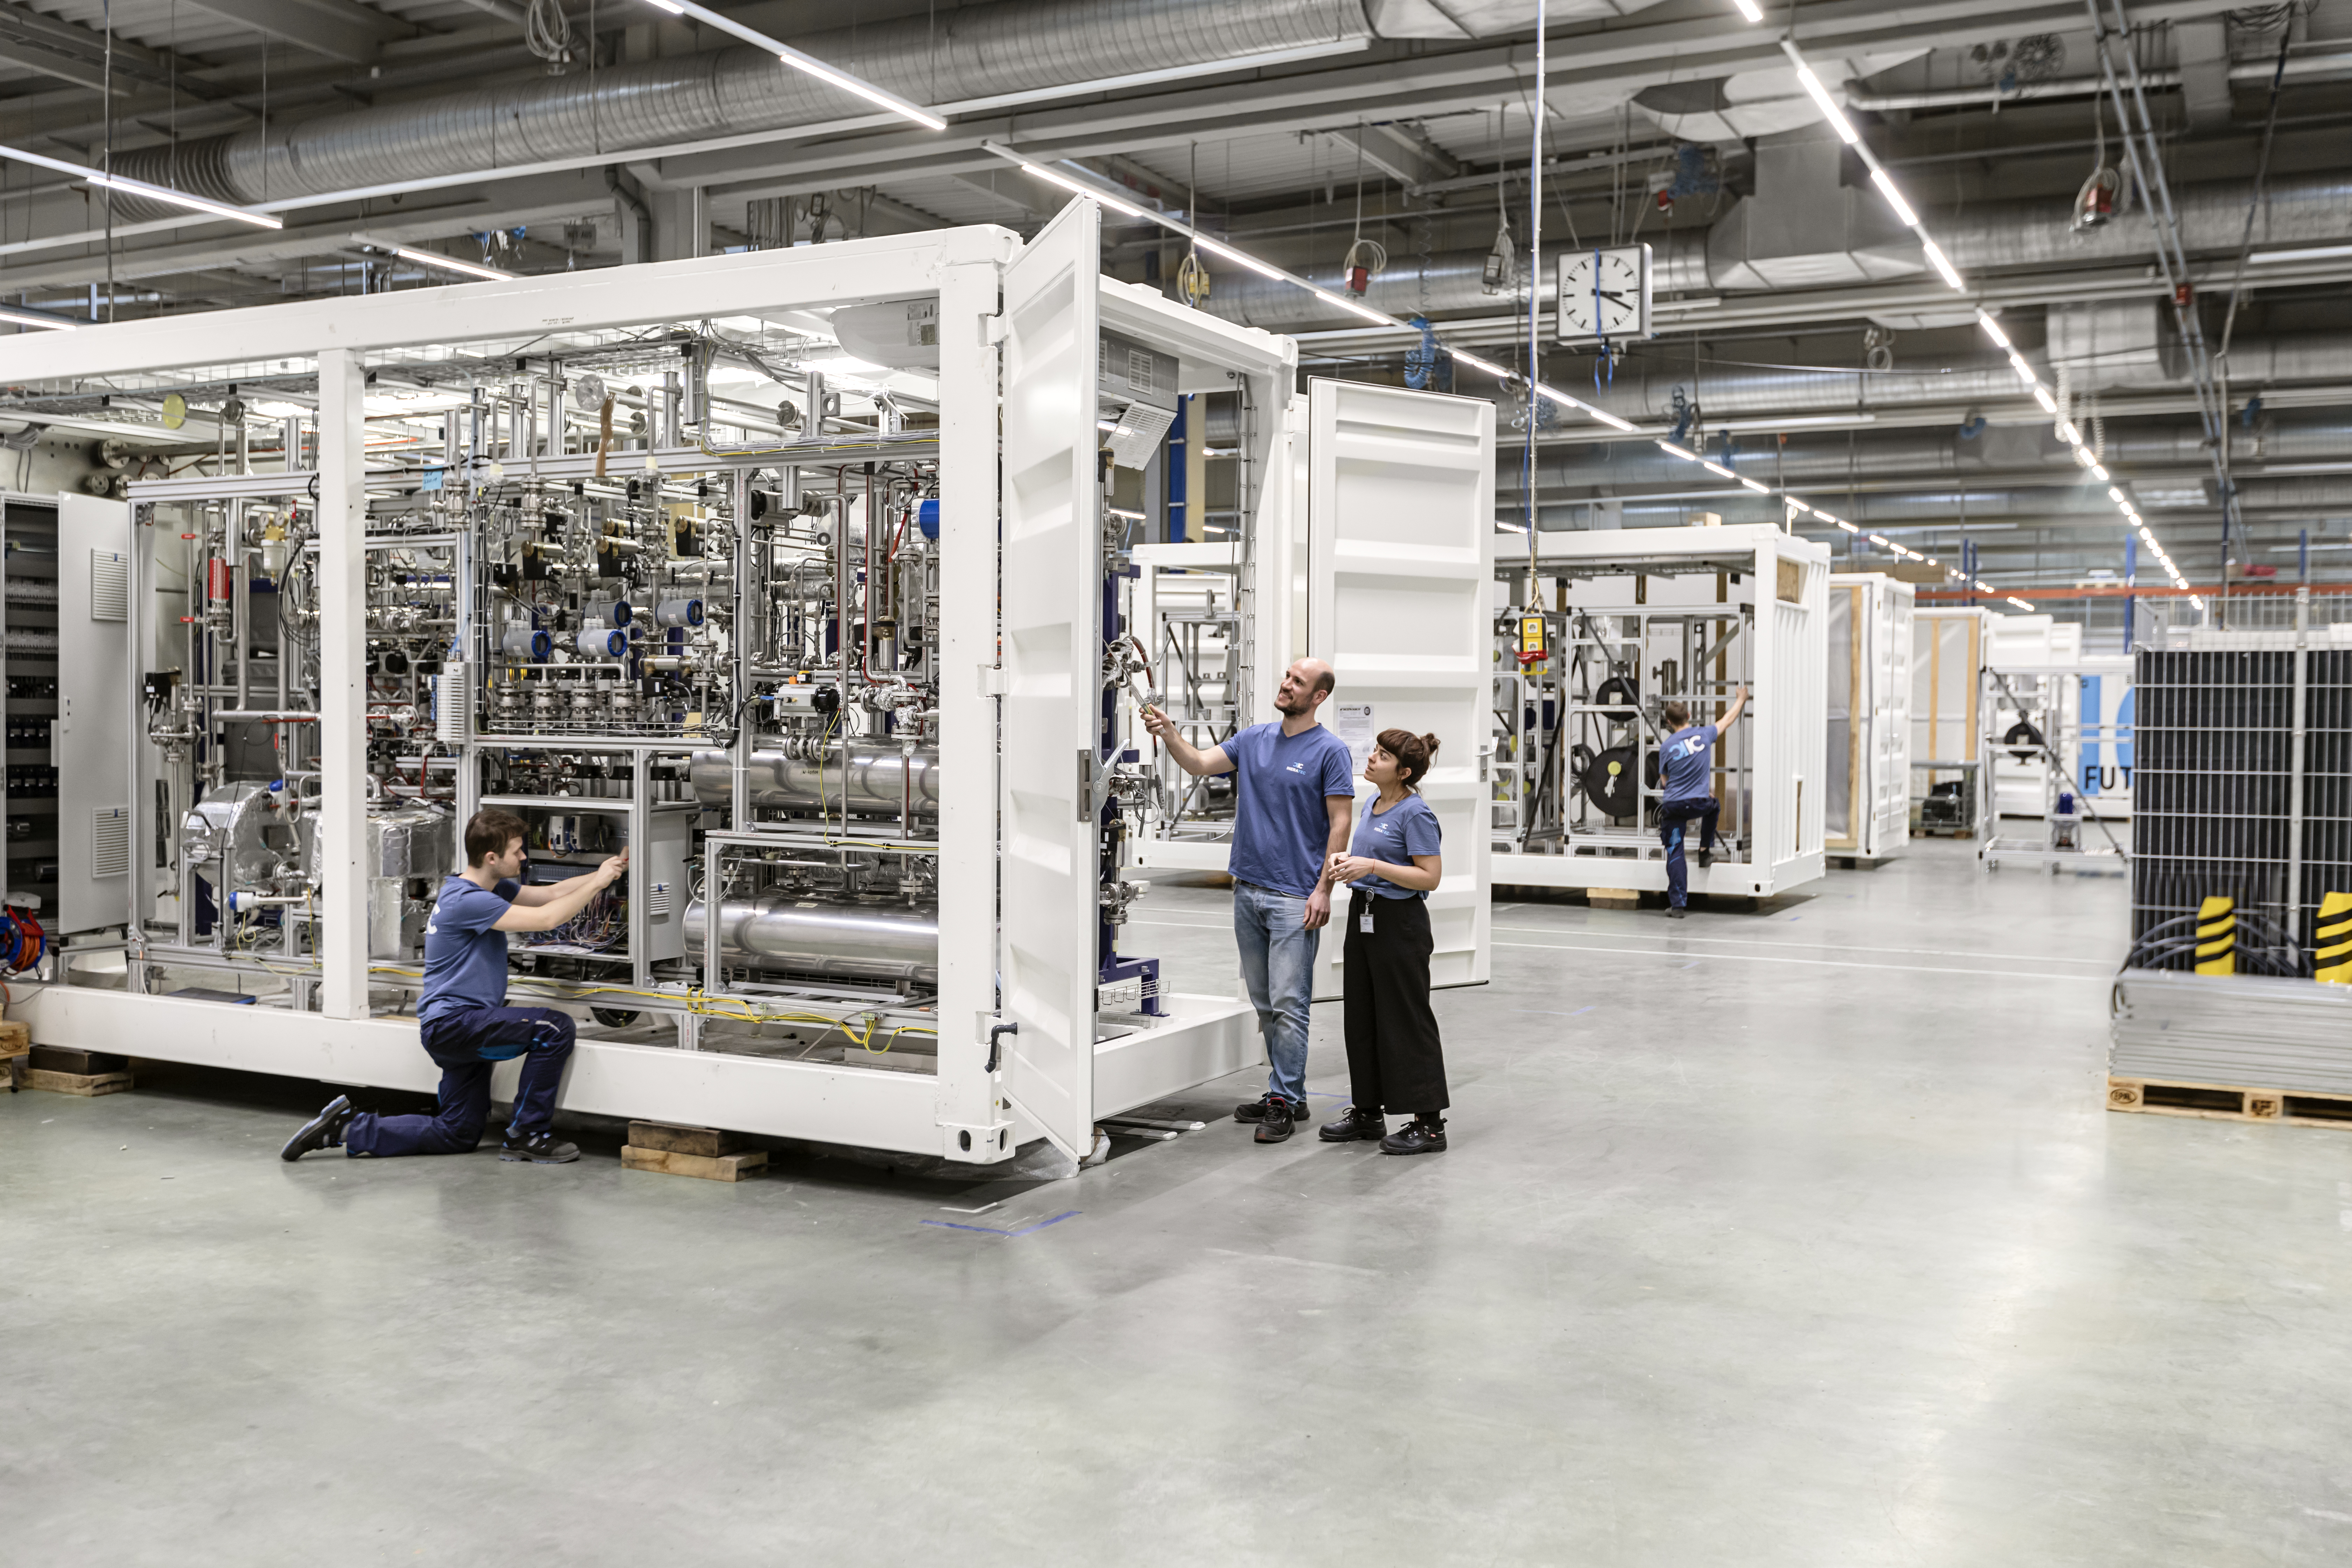 Power-to-X plant production at INERATEC in Karlsruhe